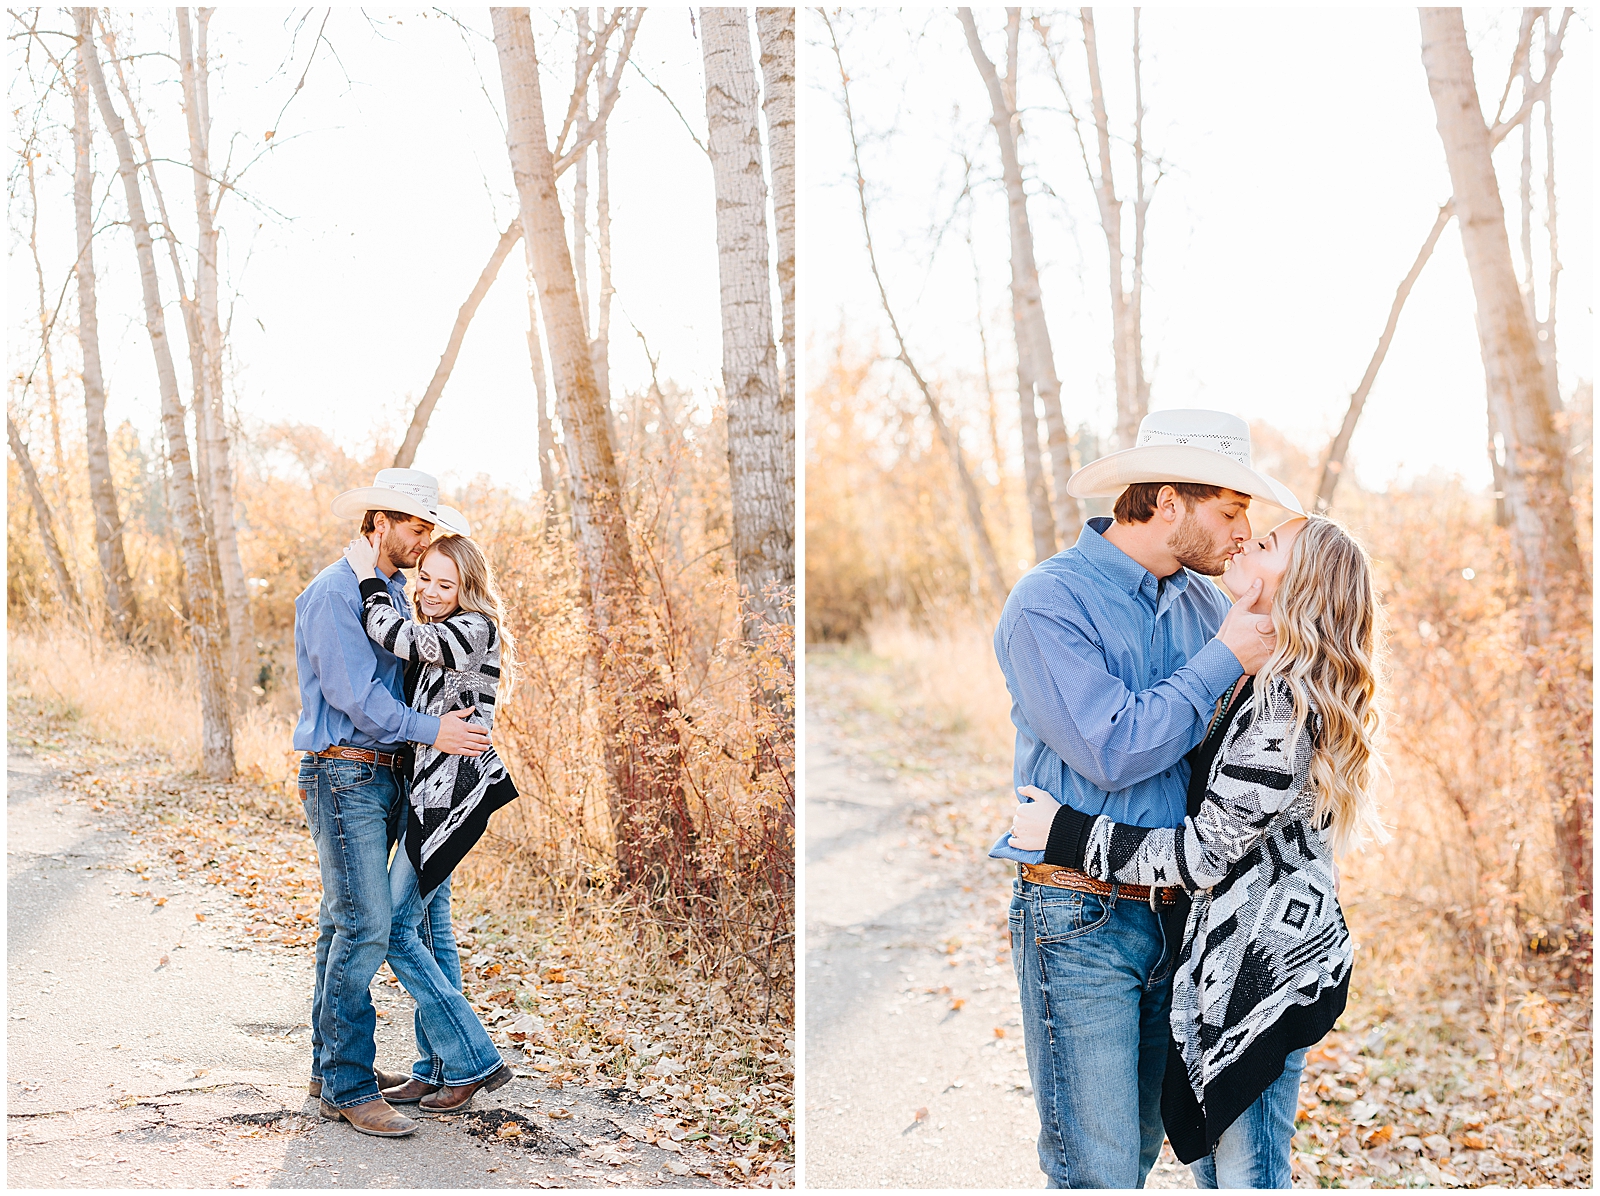 Boise Fall Engagement Session at Golden Hour